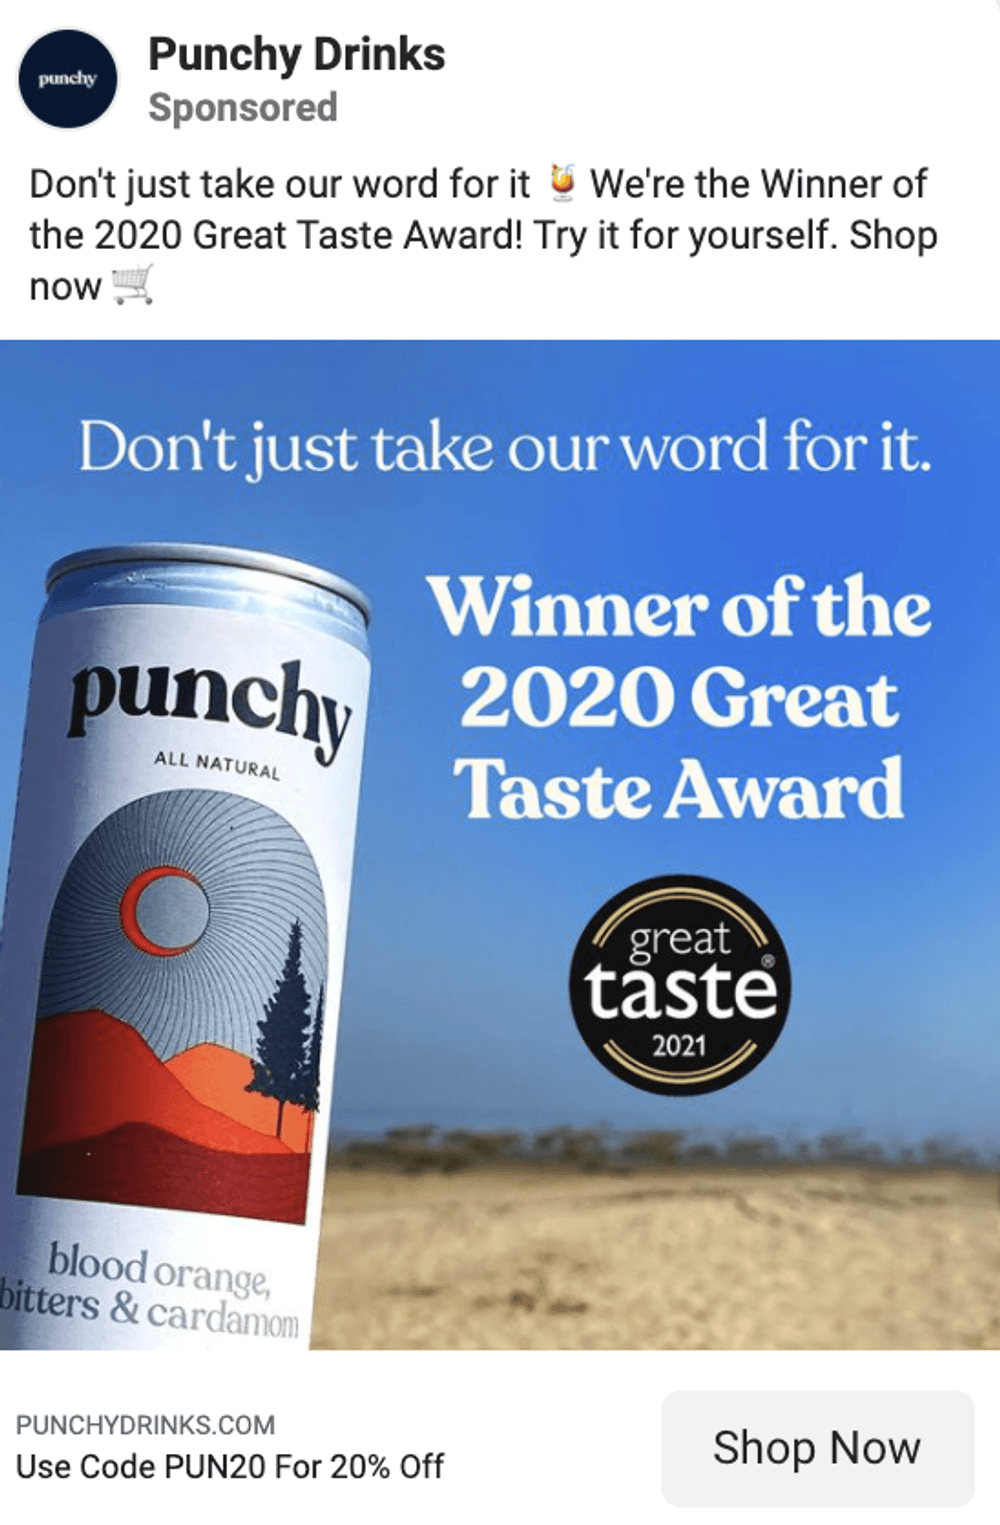 Facebook ad copy examples food & drinks brand